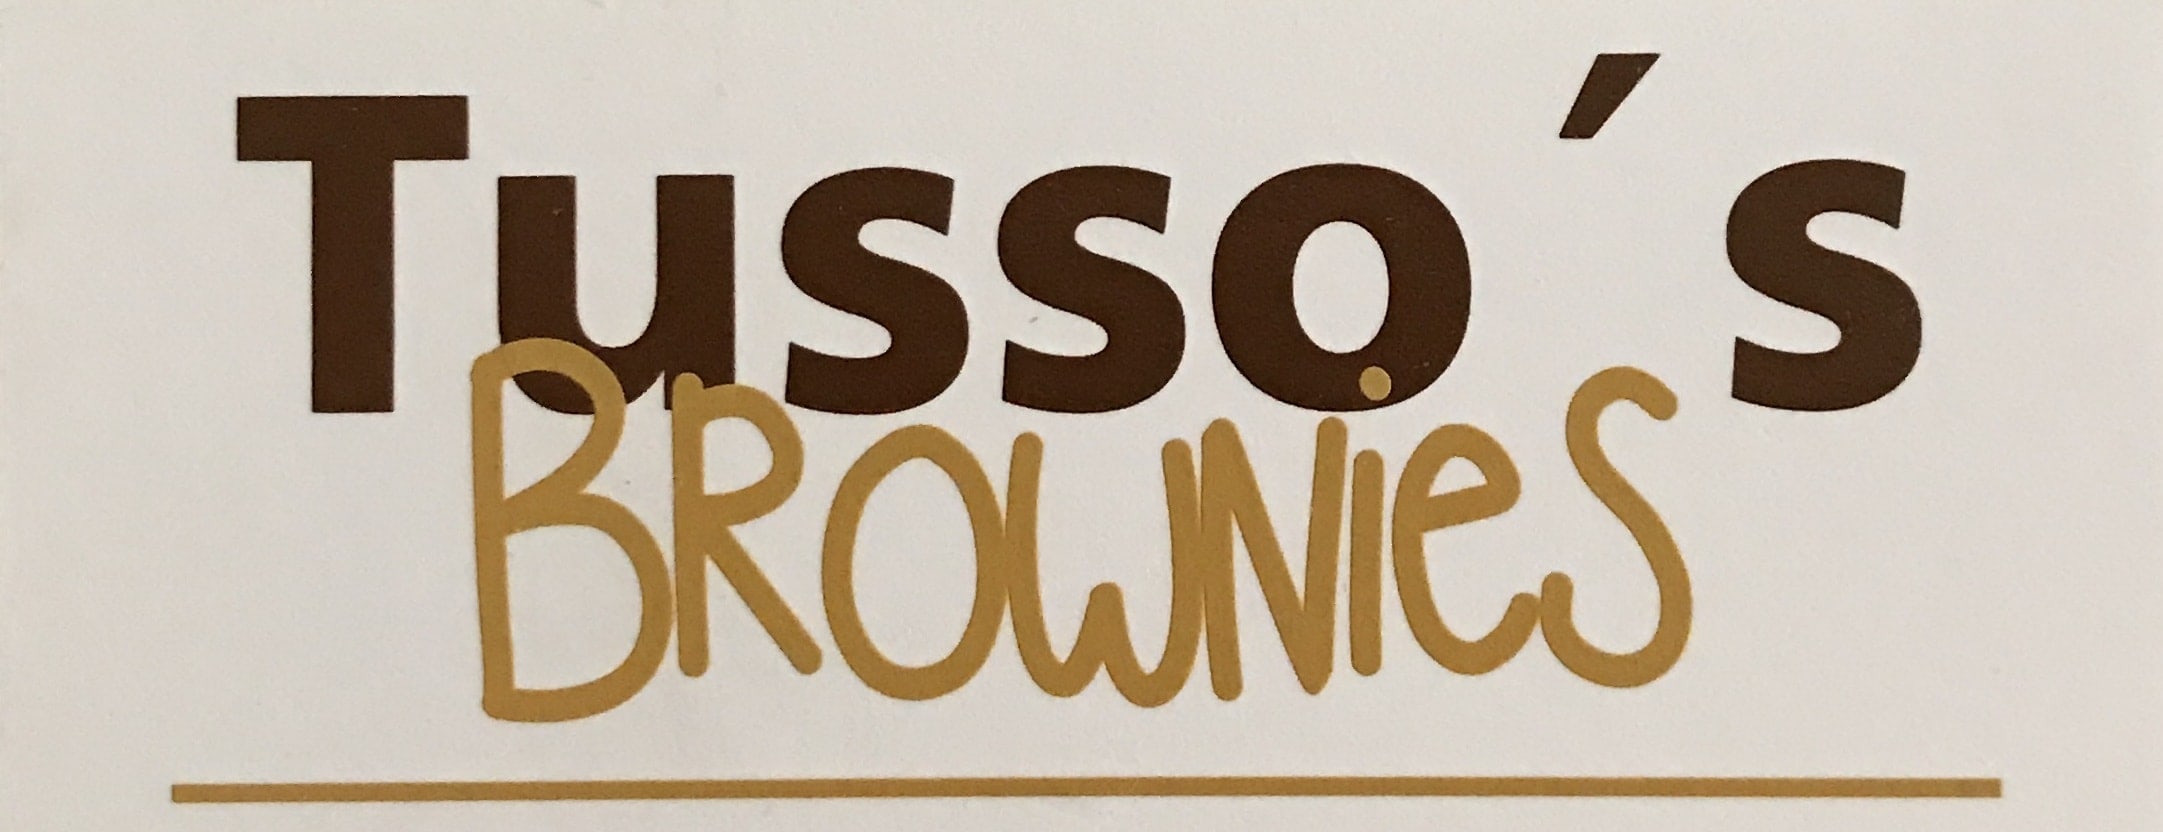 Tusso’s Brownies